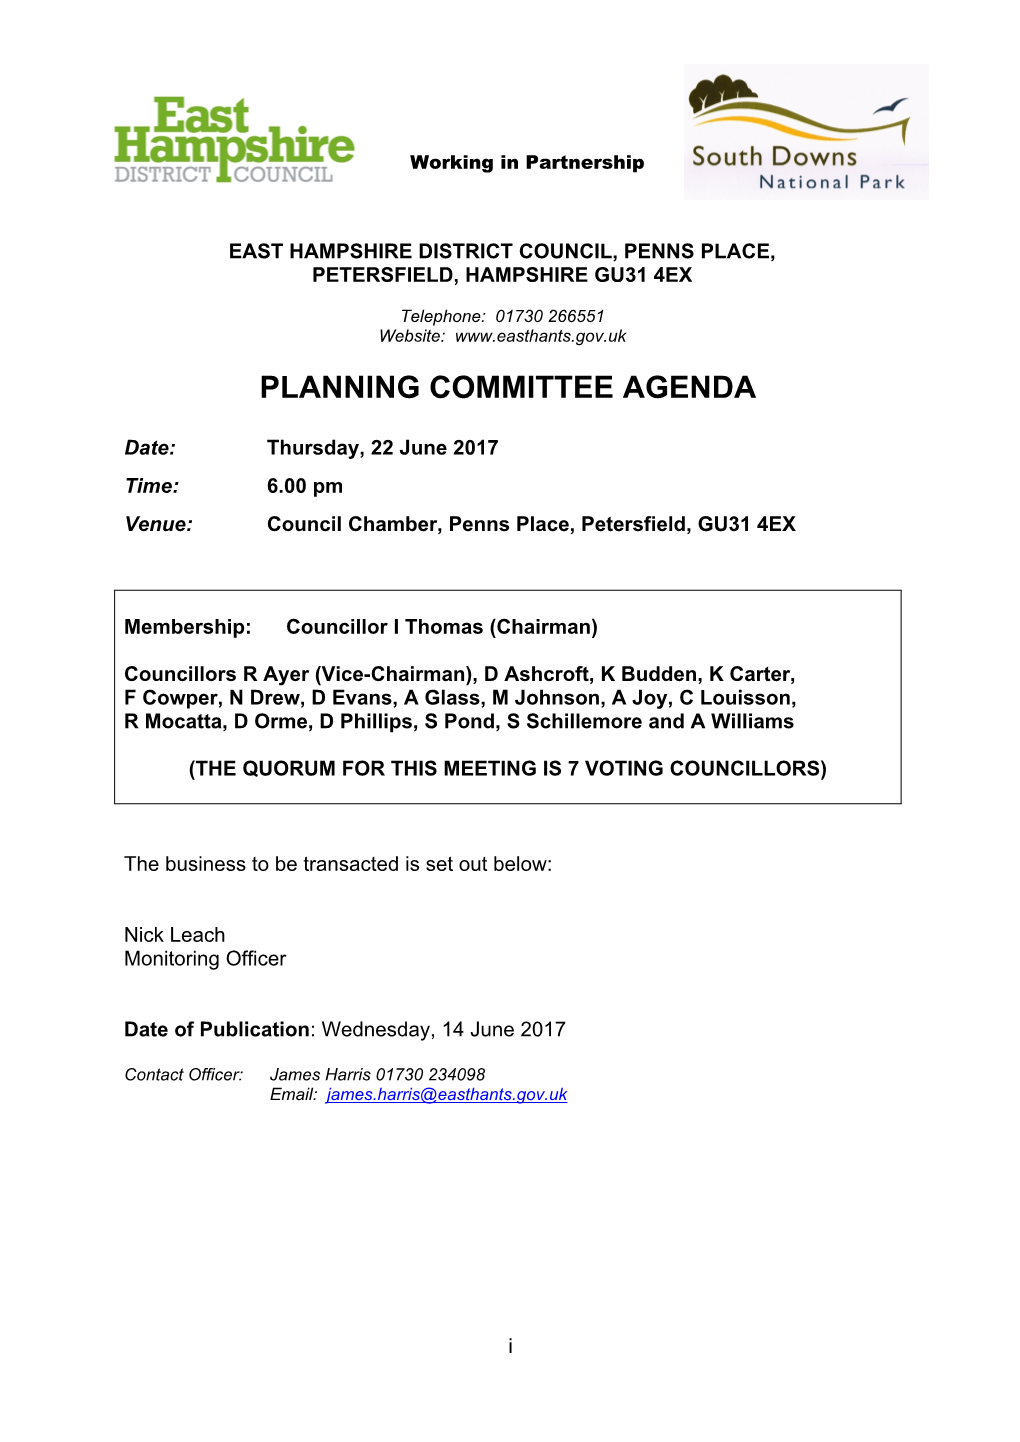 Agenda Document for Planning Committee, 22/06/2017 18:00